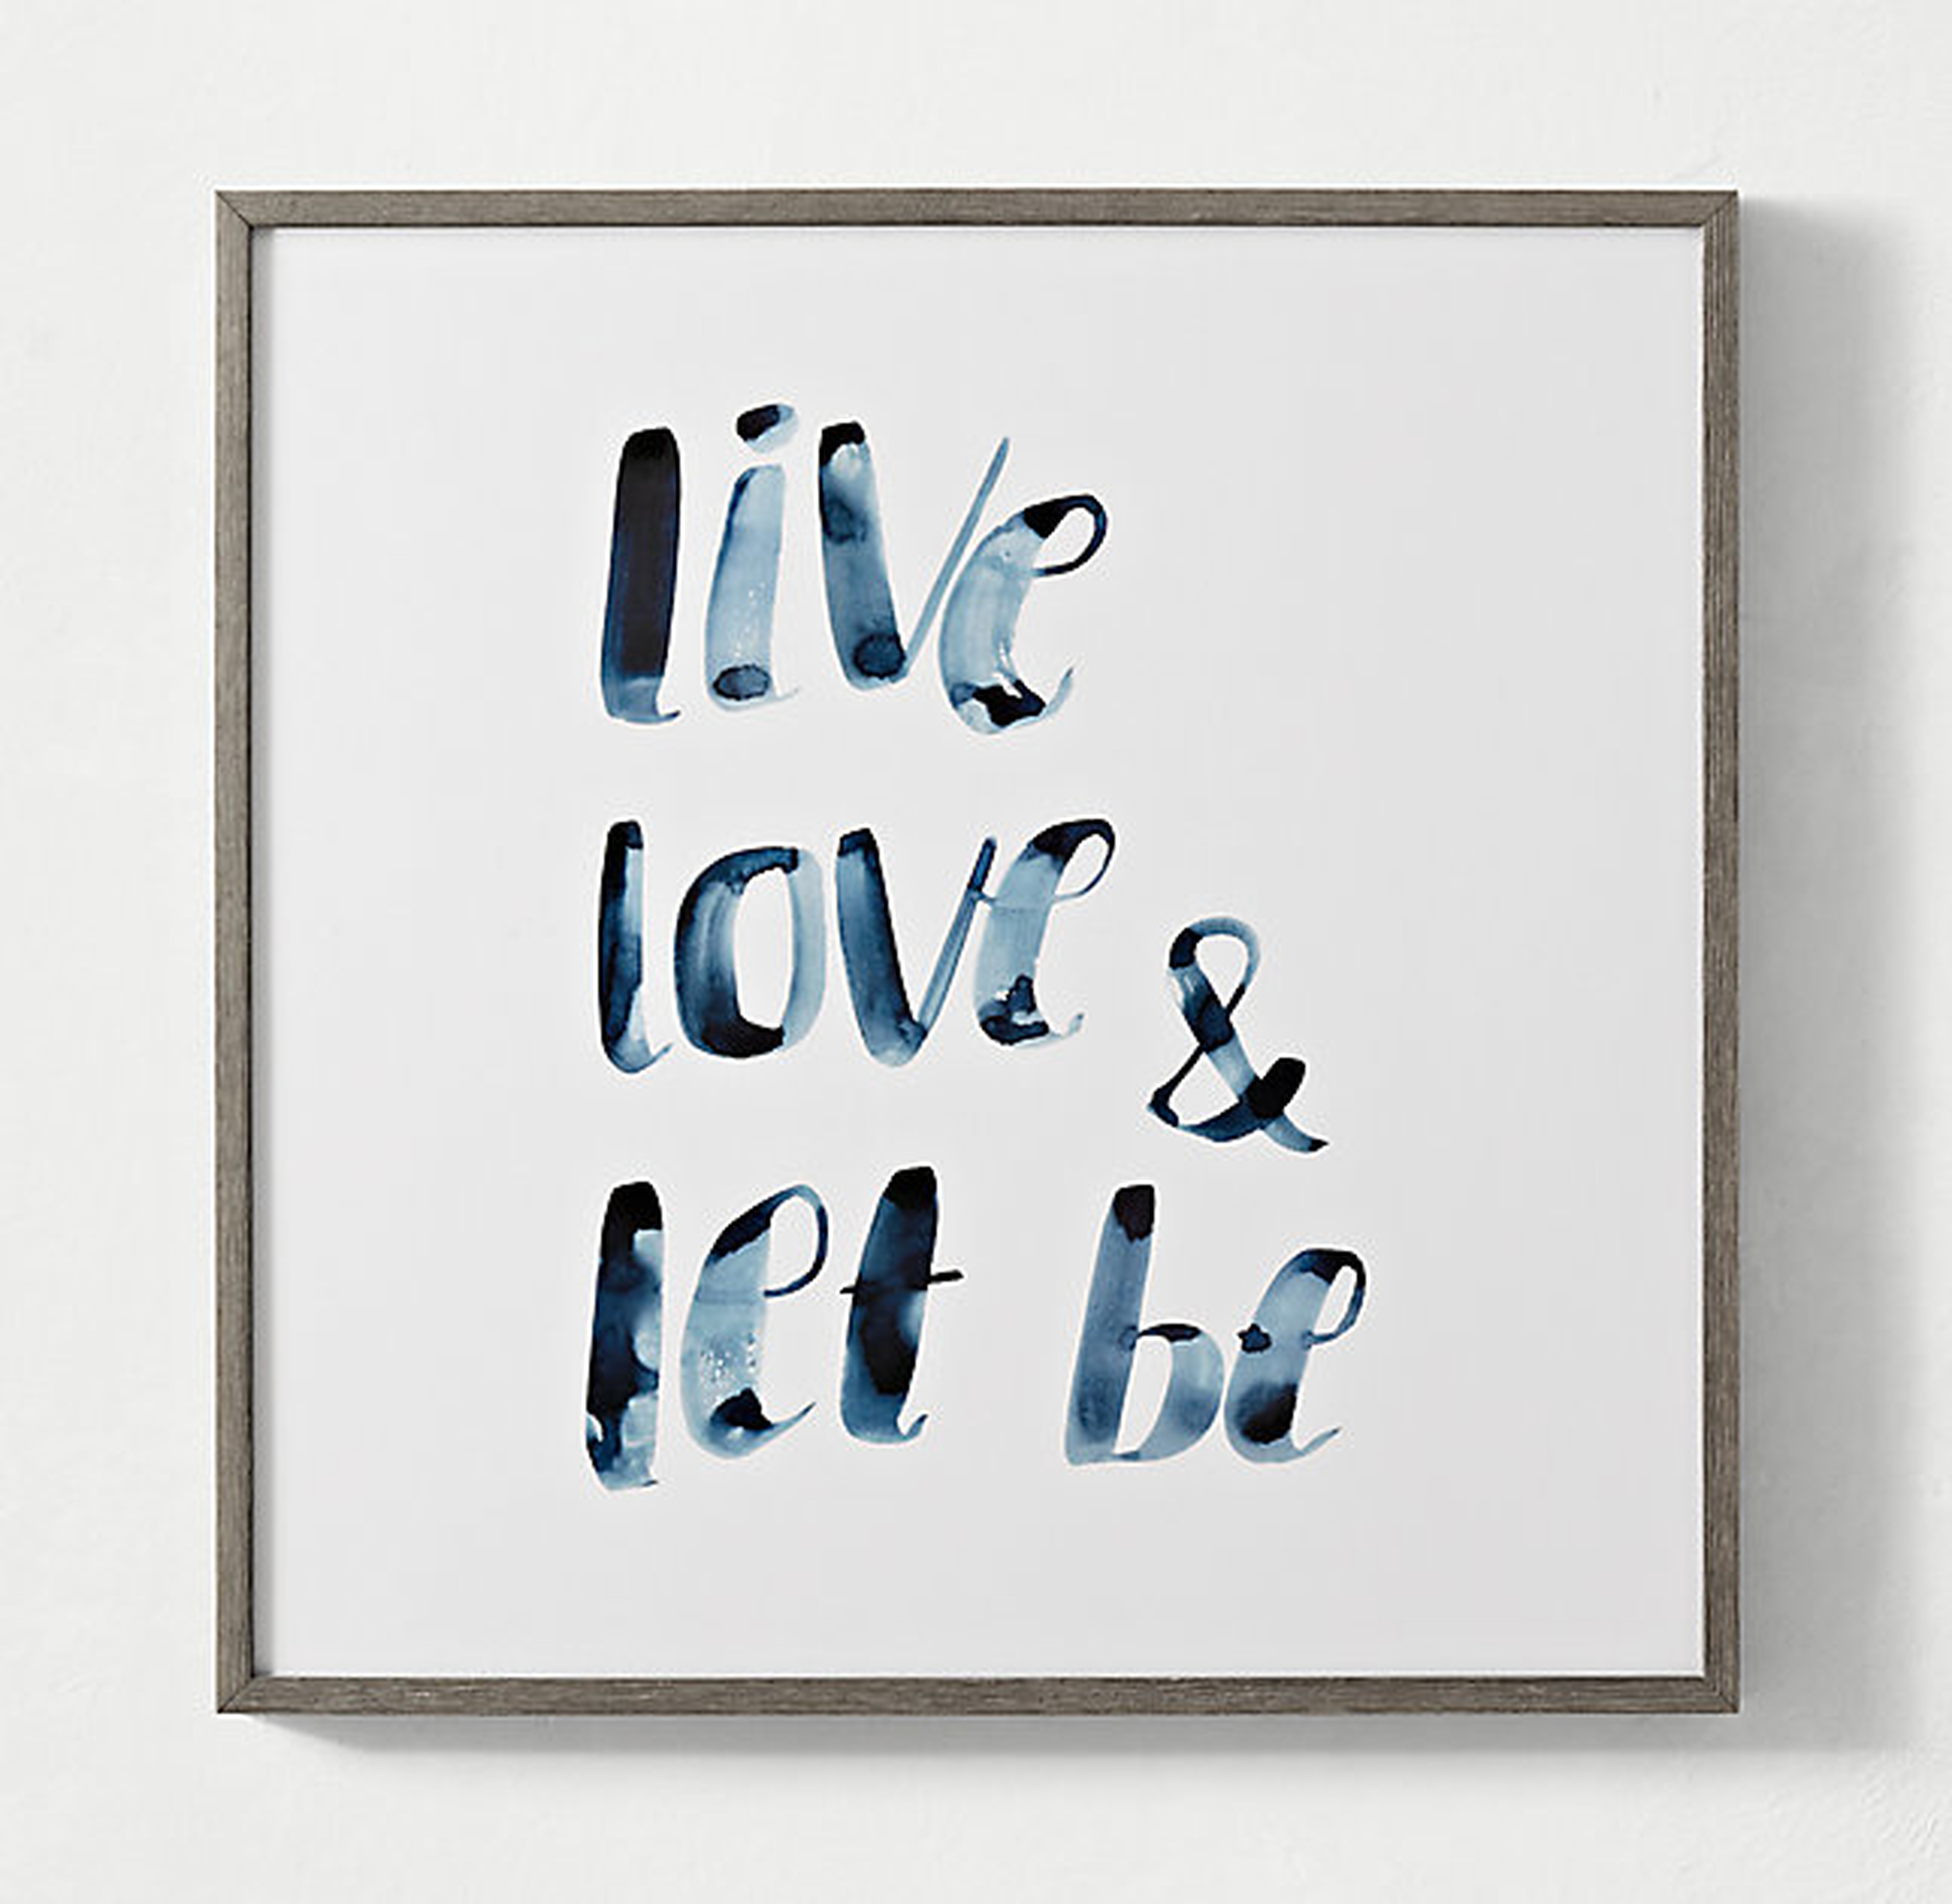 WATERCOLOR QUOTE ART - LIVE, LOVE & LET BE - RH